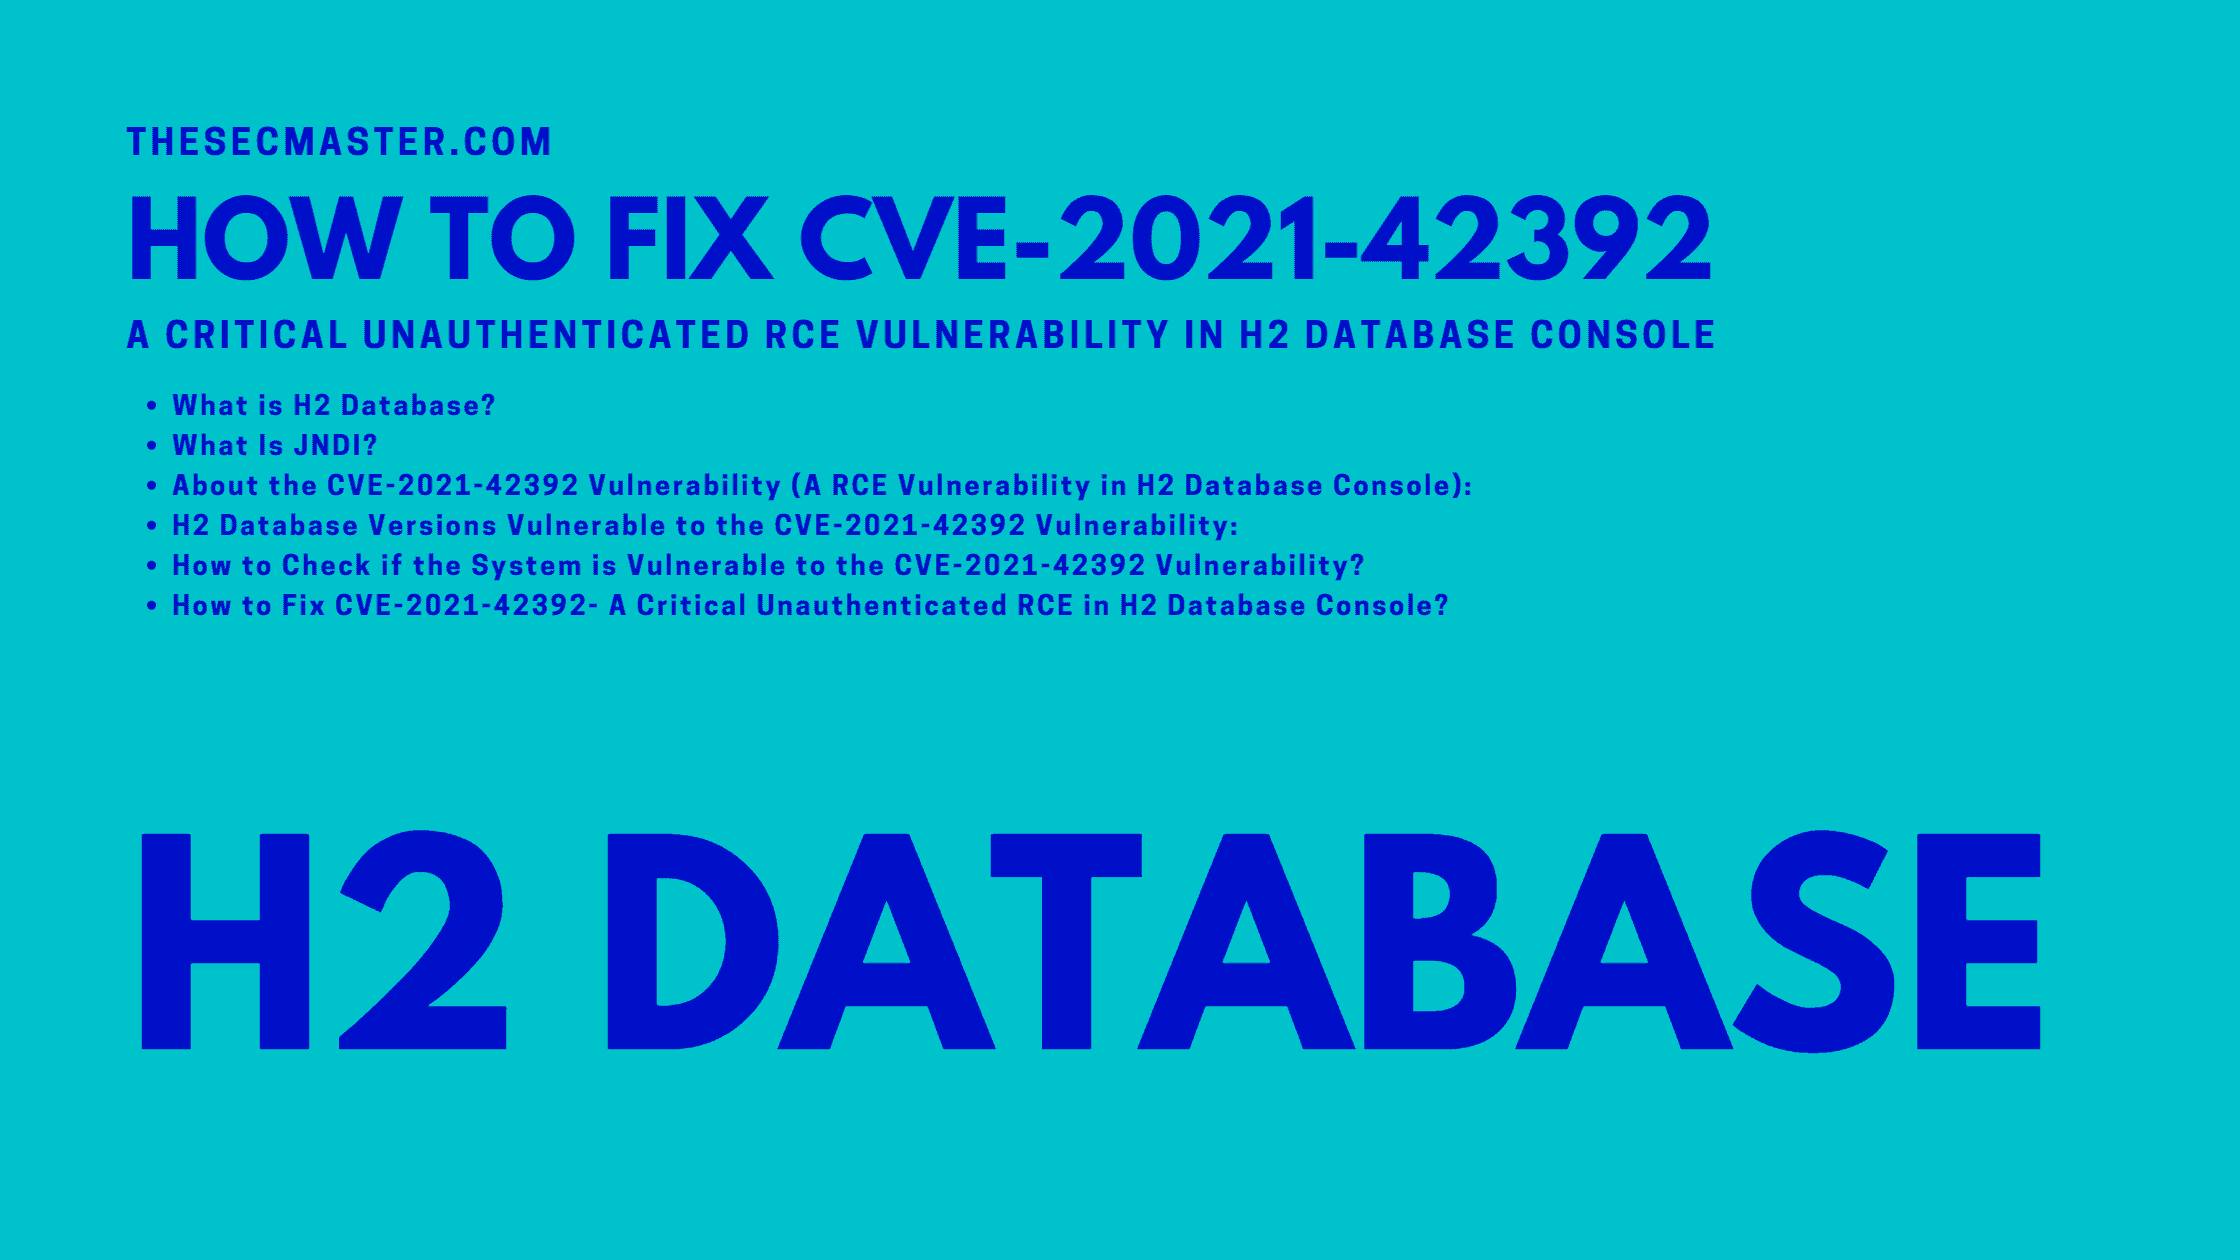 How To Fix Cve 2021 42392 A Critical Unauthenticated Rce In H2 Database Console